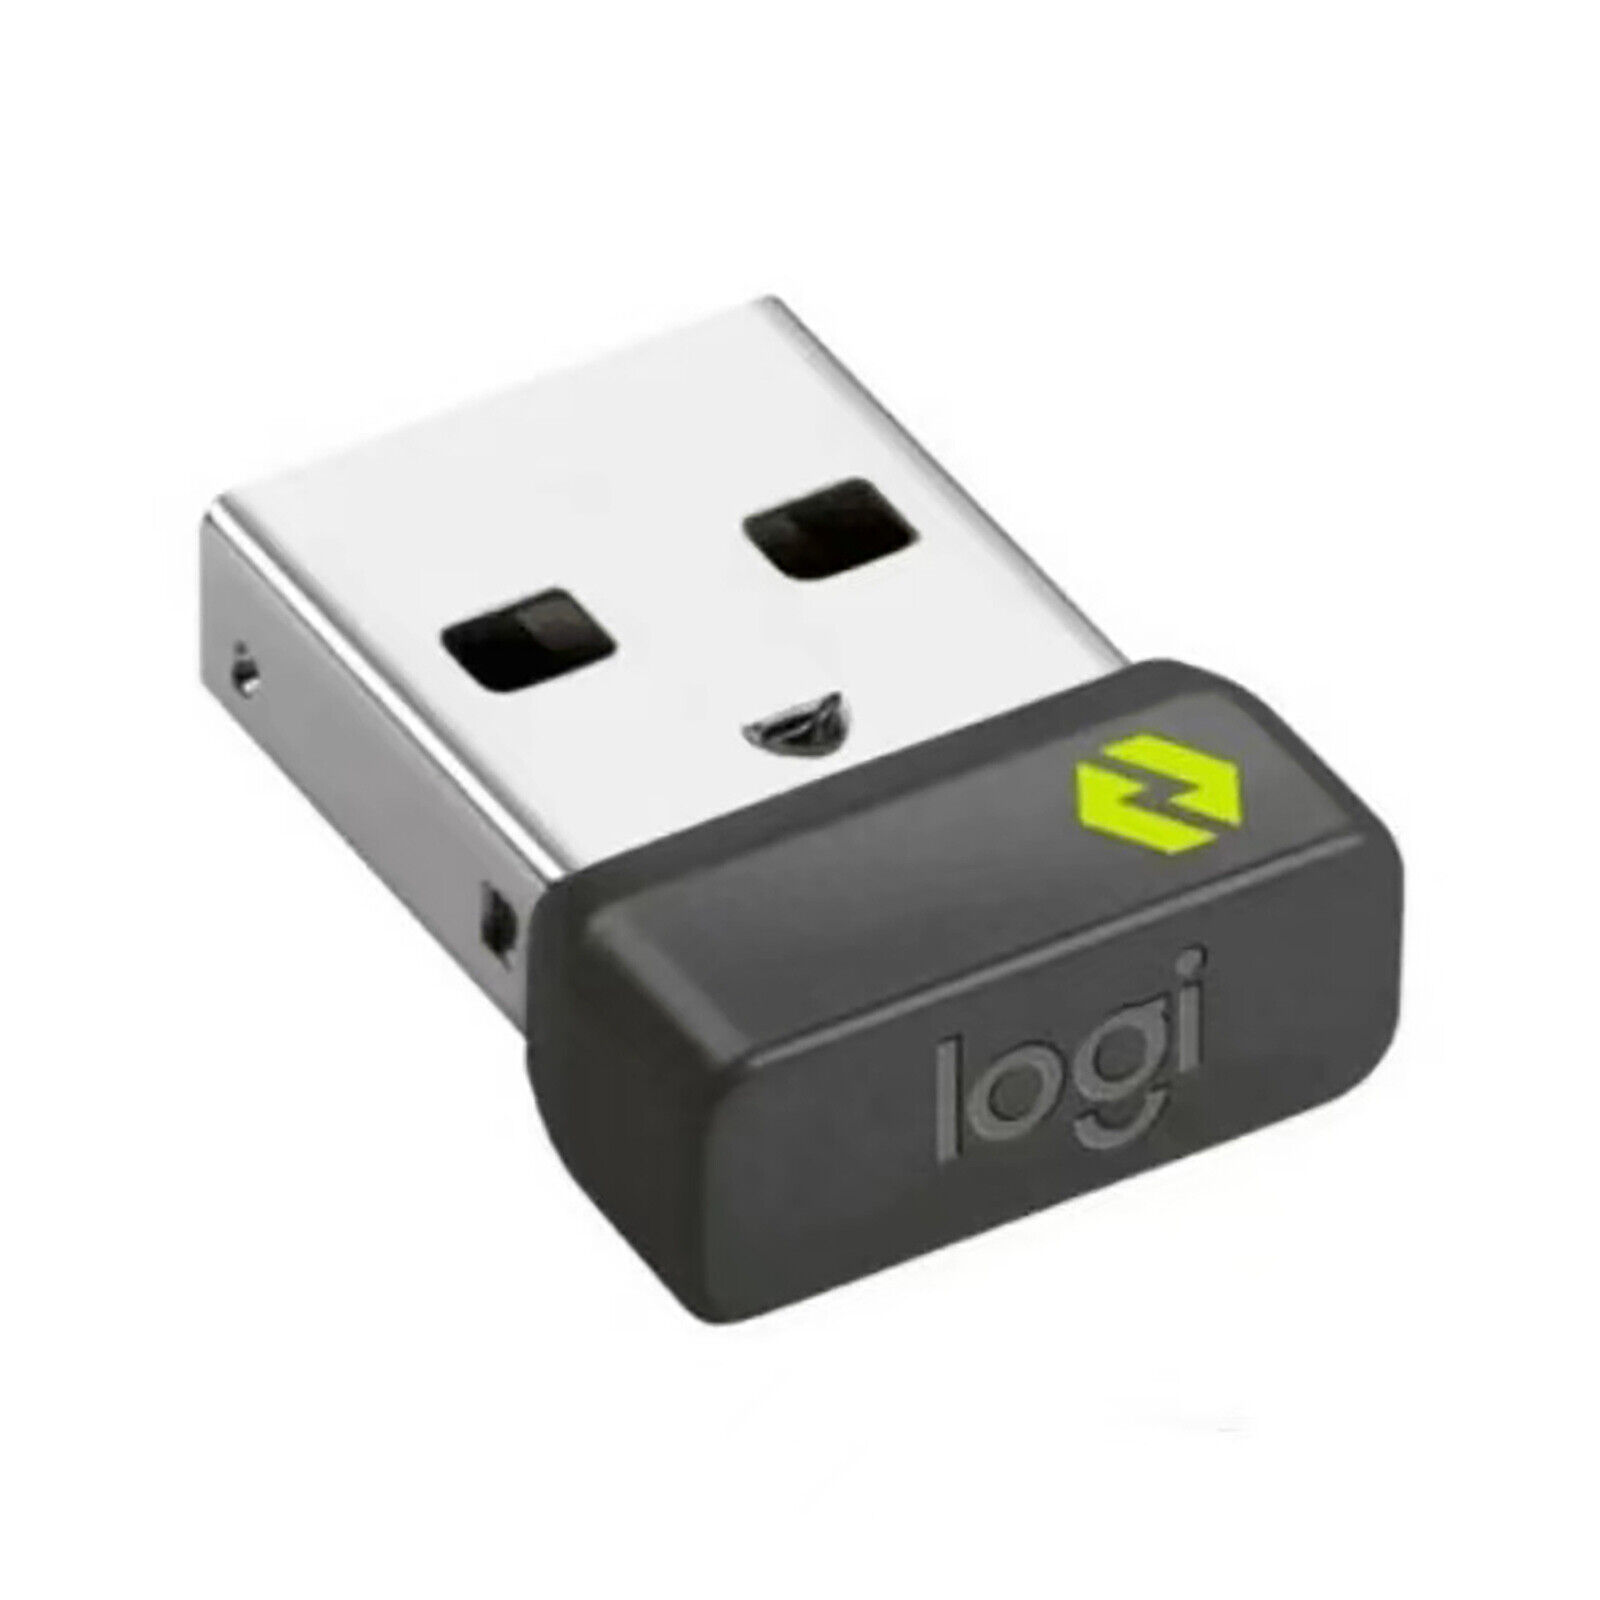 Logi Bolt USB Wireless Receiver And Keyboard Mouse for Logitech Keyboard Mouse